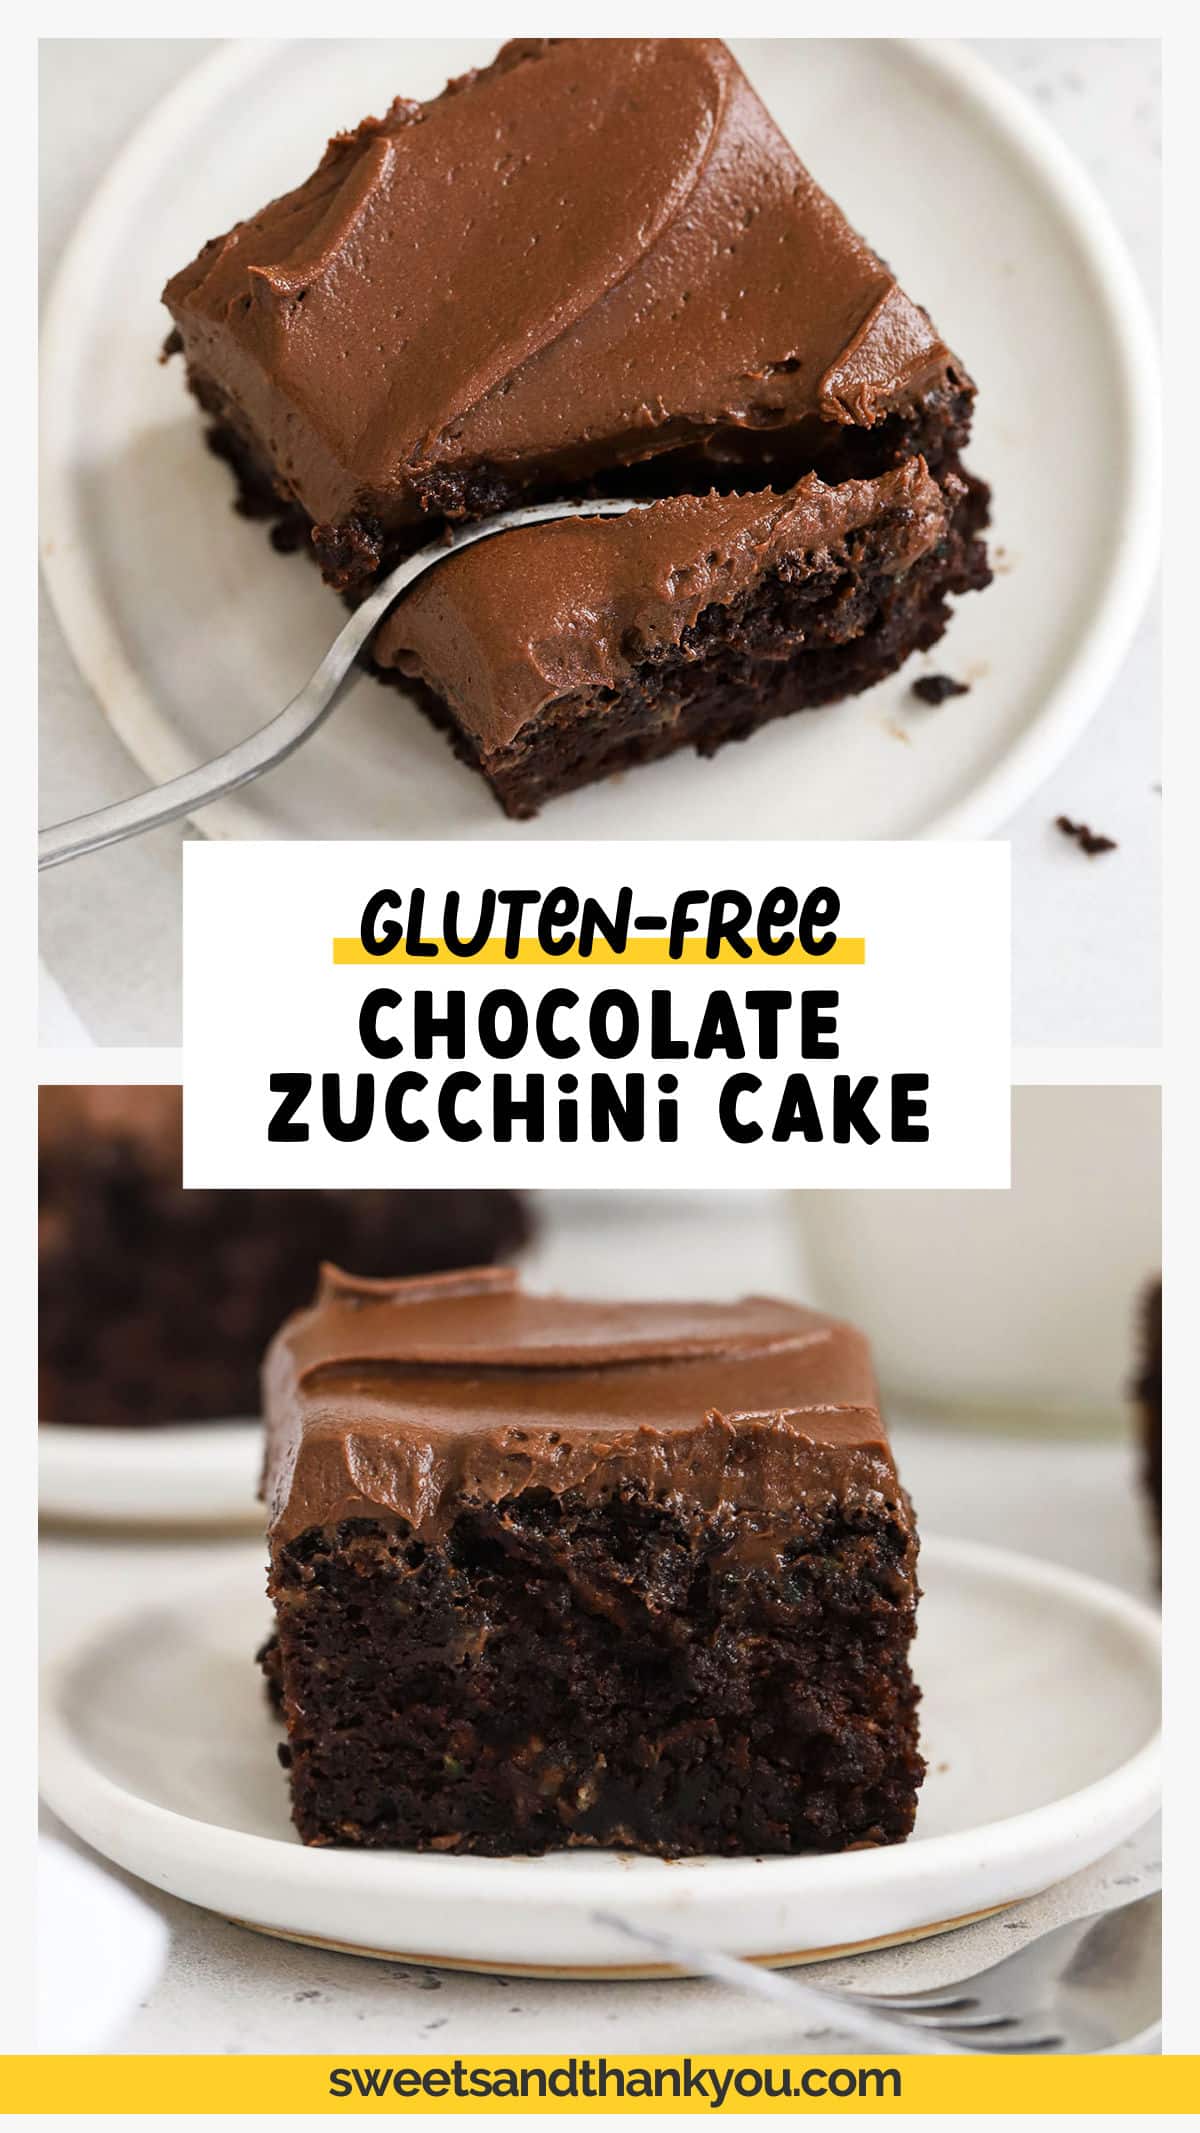 This easy Gluten-Free Chocolate Zucchini Cake recipe is so plush and delicious no one will guess it's gluten-free. (You'll LOVE the chocolate frosting!) Easy enough for a beginner, this zucchini recipe is always a winner! Get the recipe and our best zucchini tips at sweetsandthankyou.com